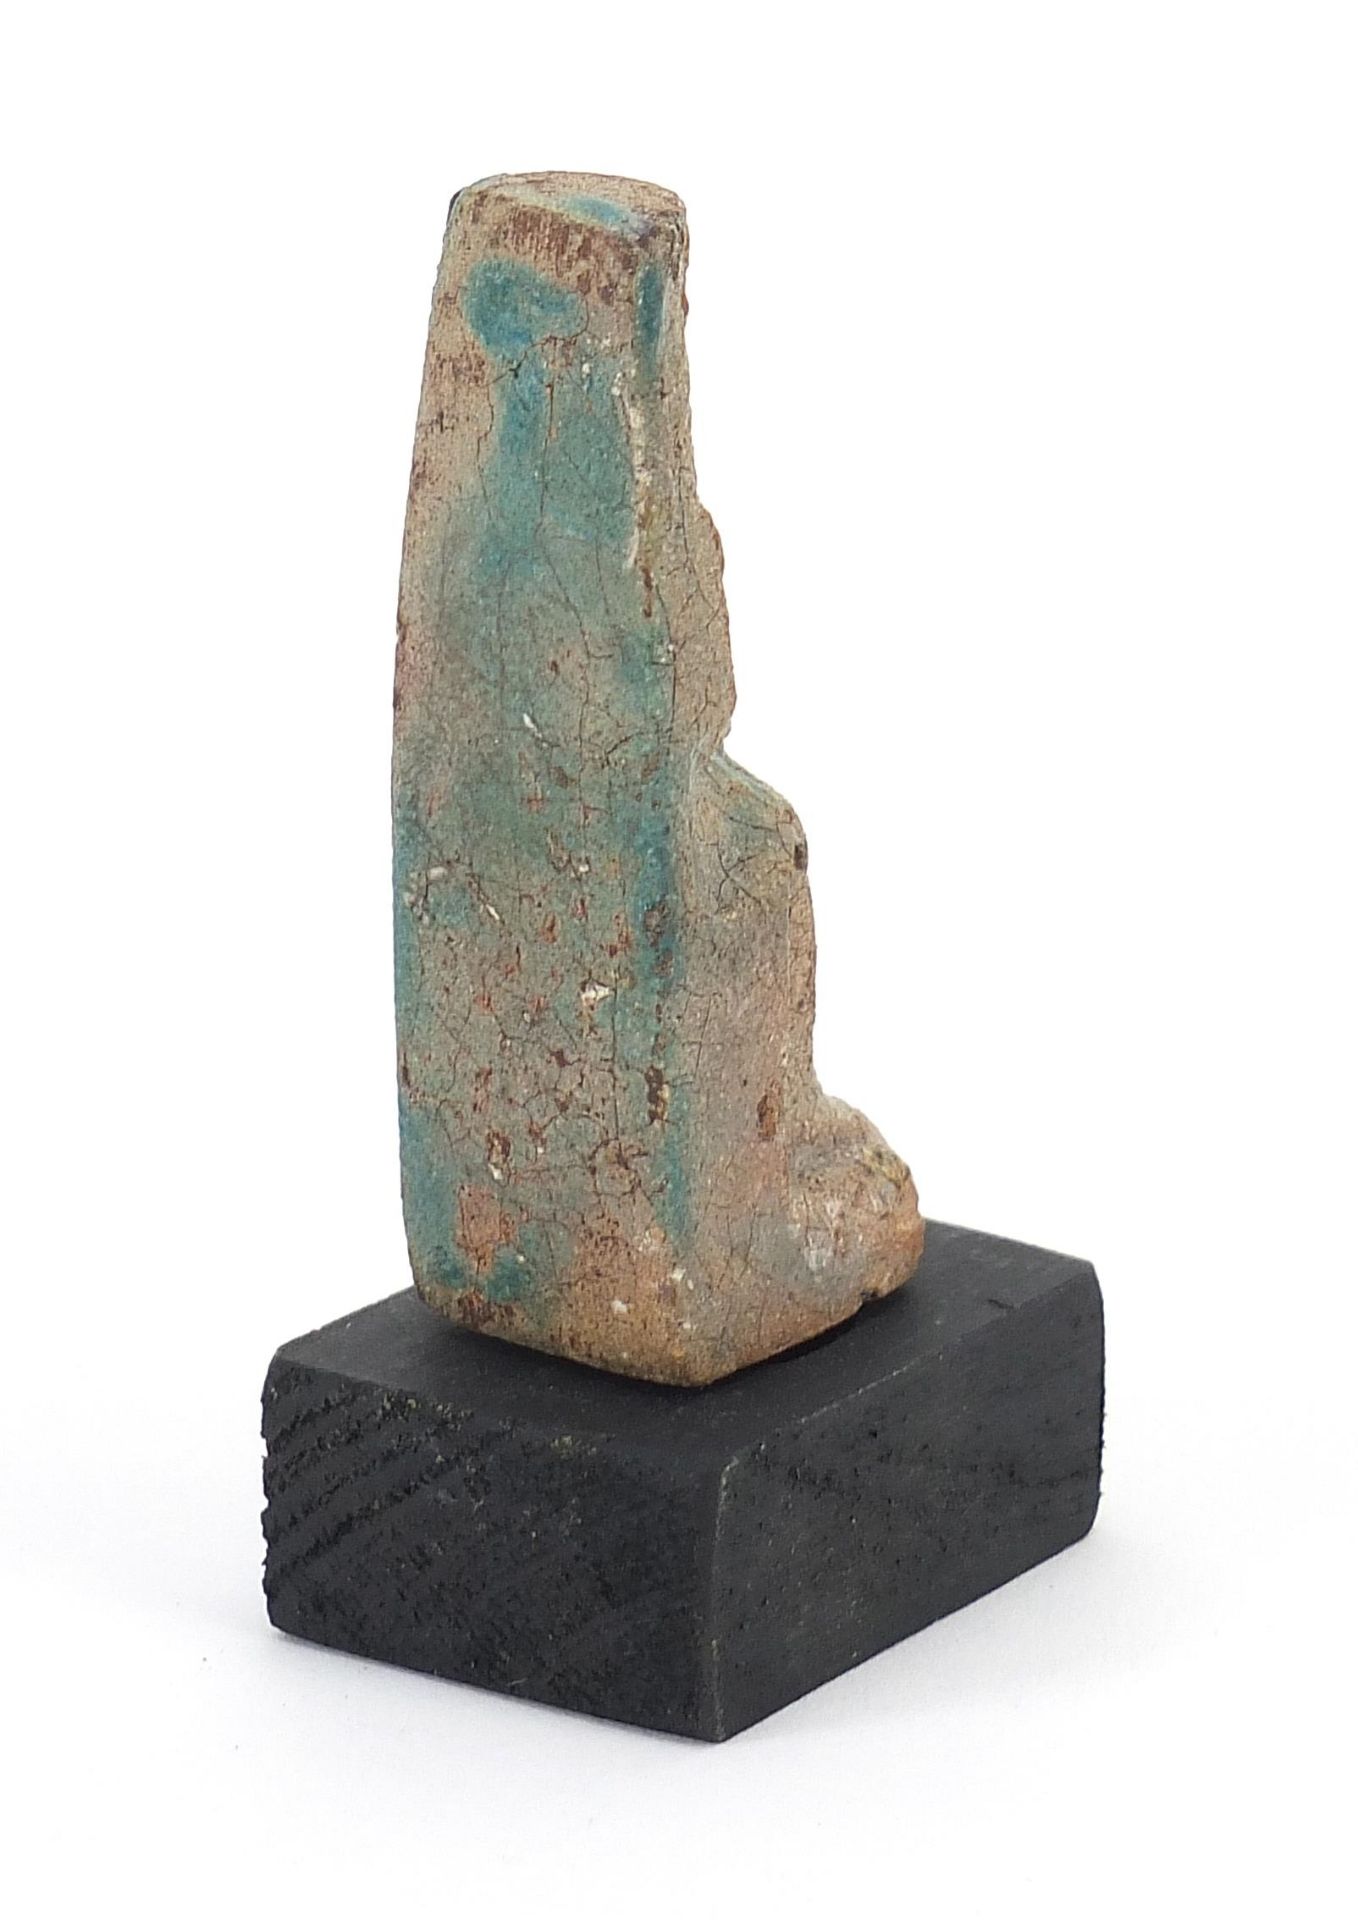 Egyptian style stone figure raised on a wooden base, overall 10cm high - Image 2 of 3